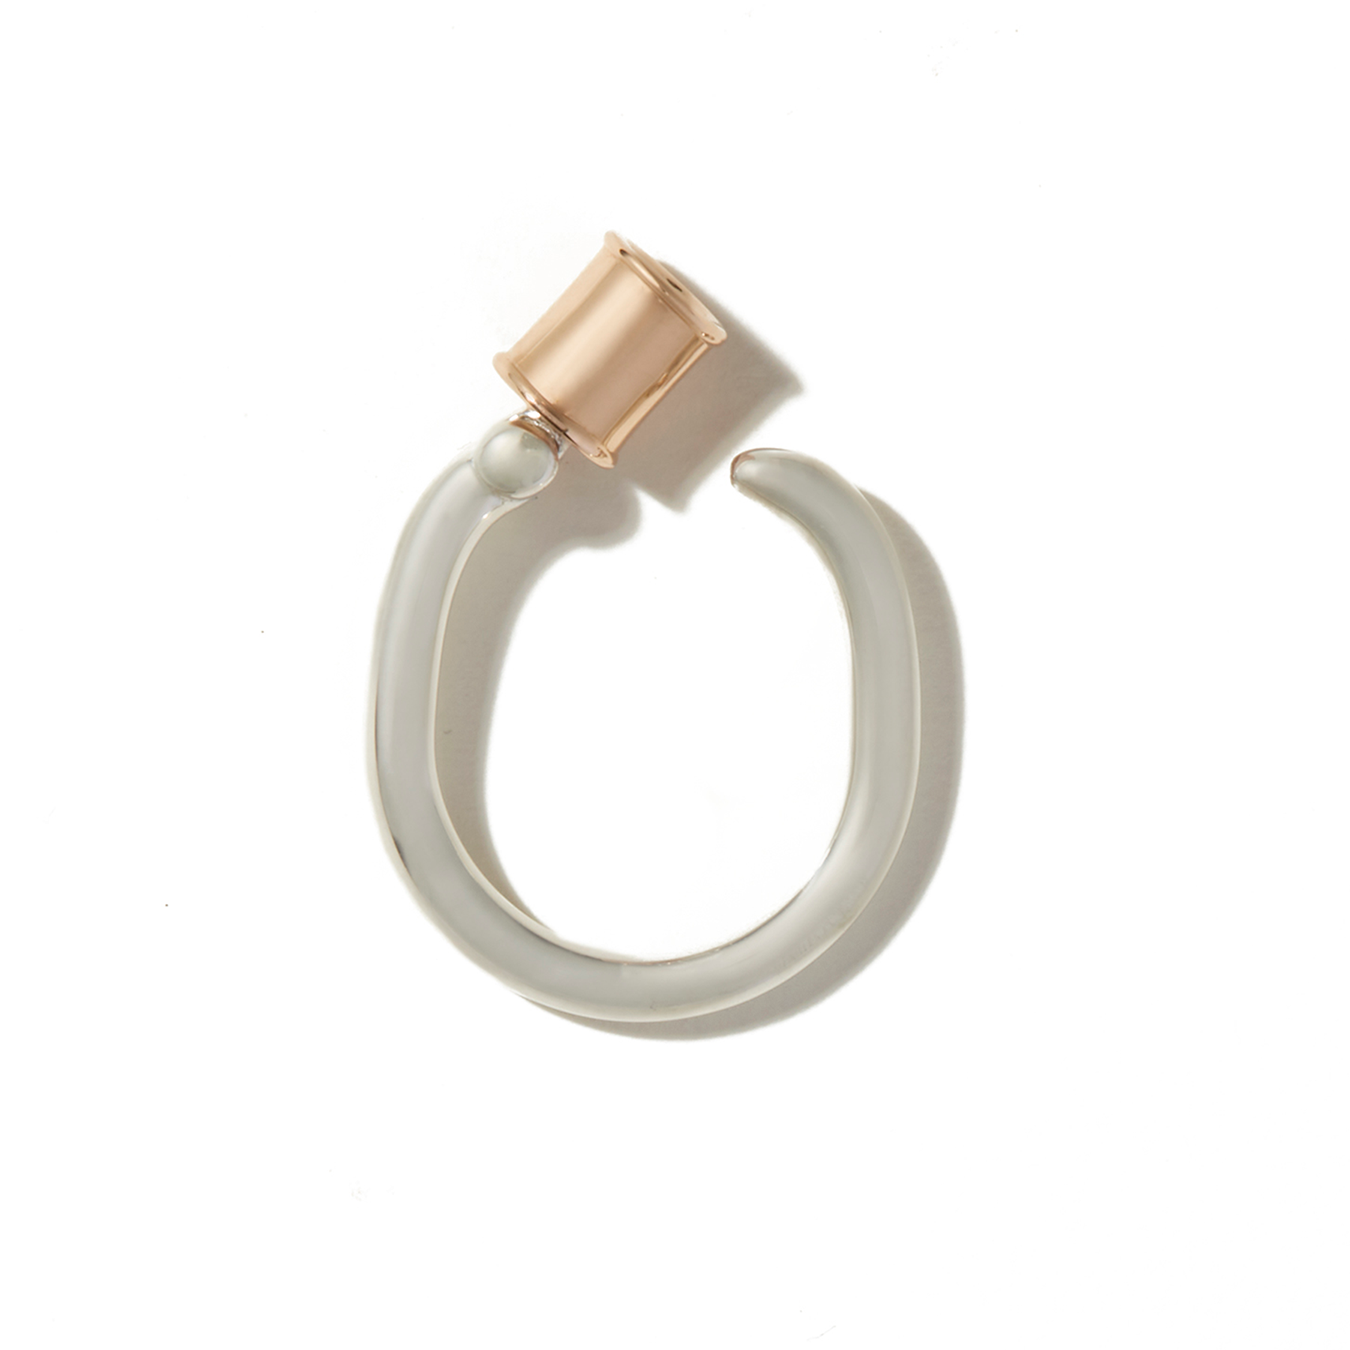 Silver trundle lock ring with yellow gold clasp